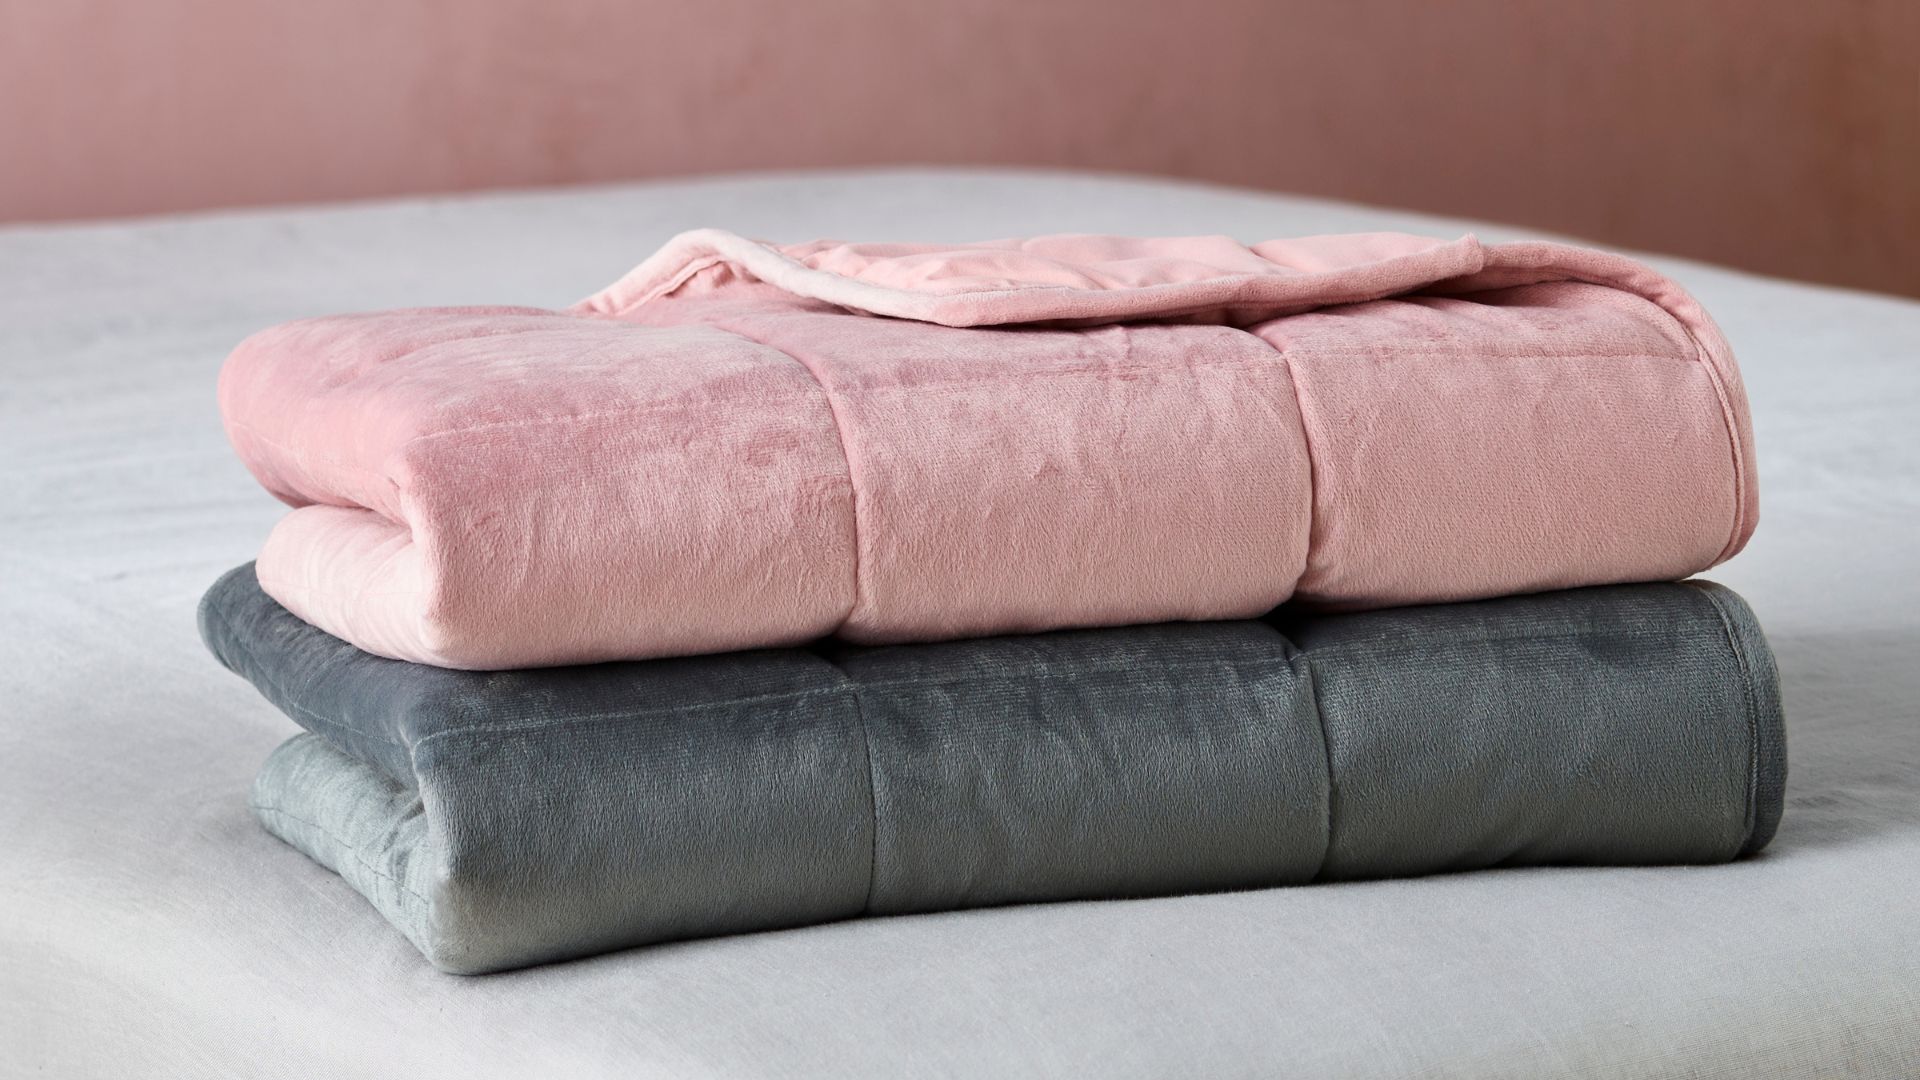 How Does A Weighted Blanket Work?